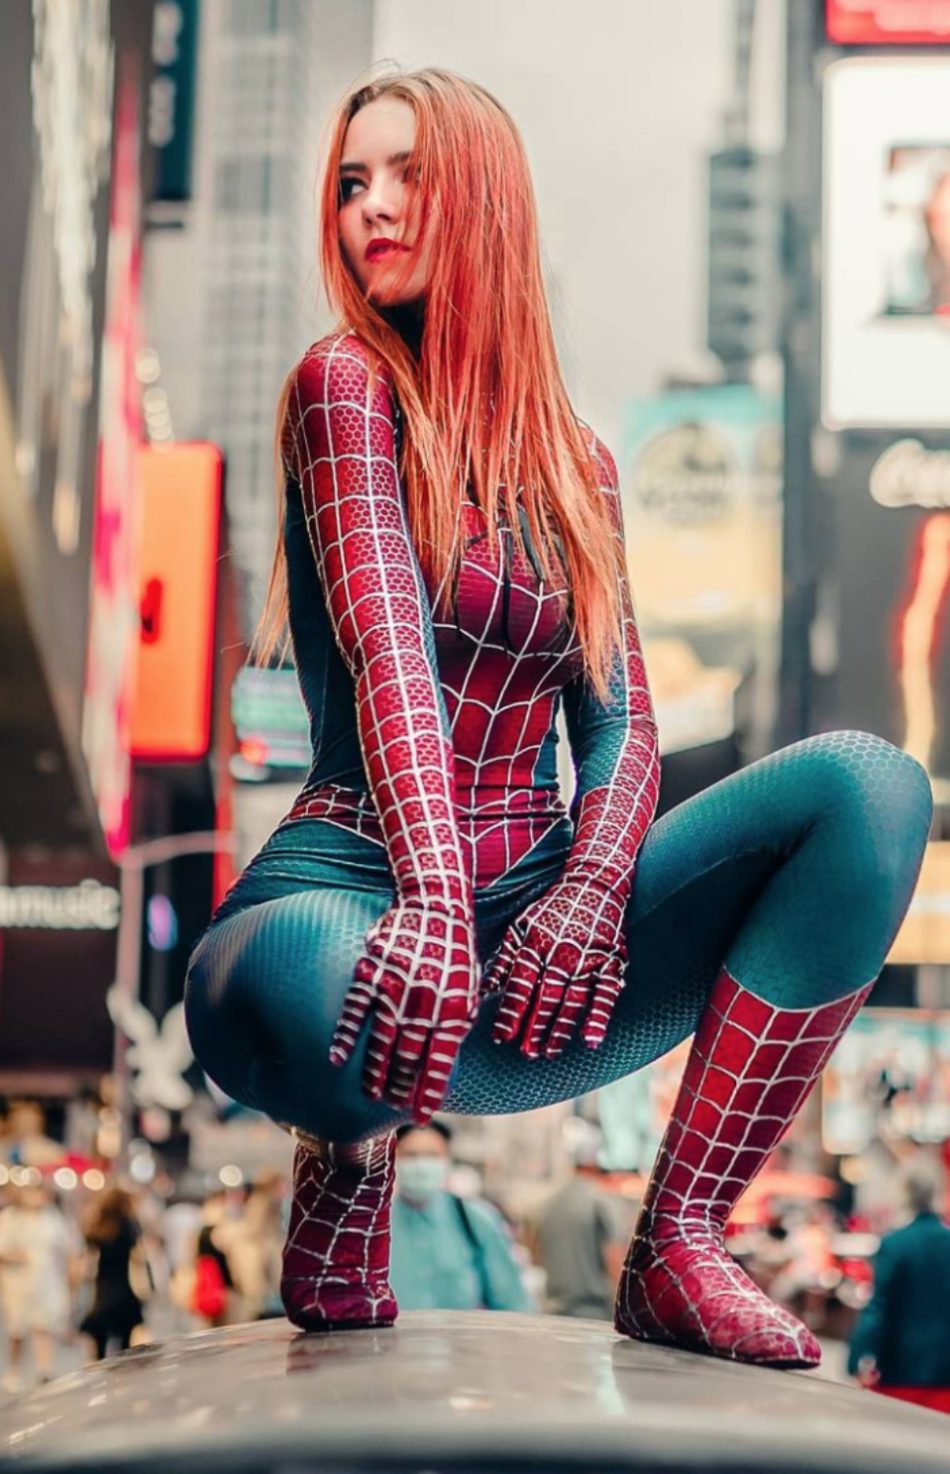 Sexy Red Hot Cosplay Girls Spiderman Women Best Photo Compilation 2021 (89 HQ Photos) 185